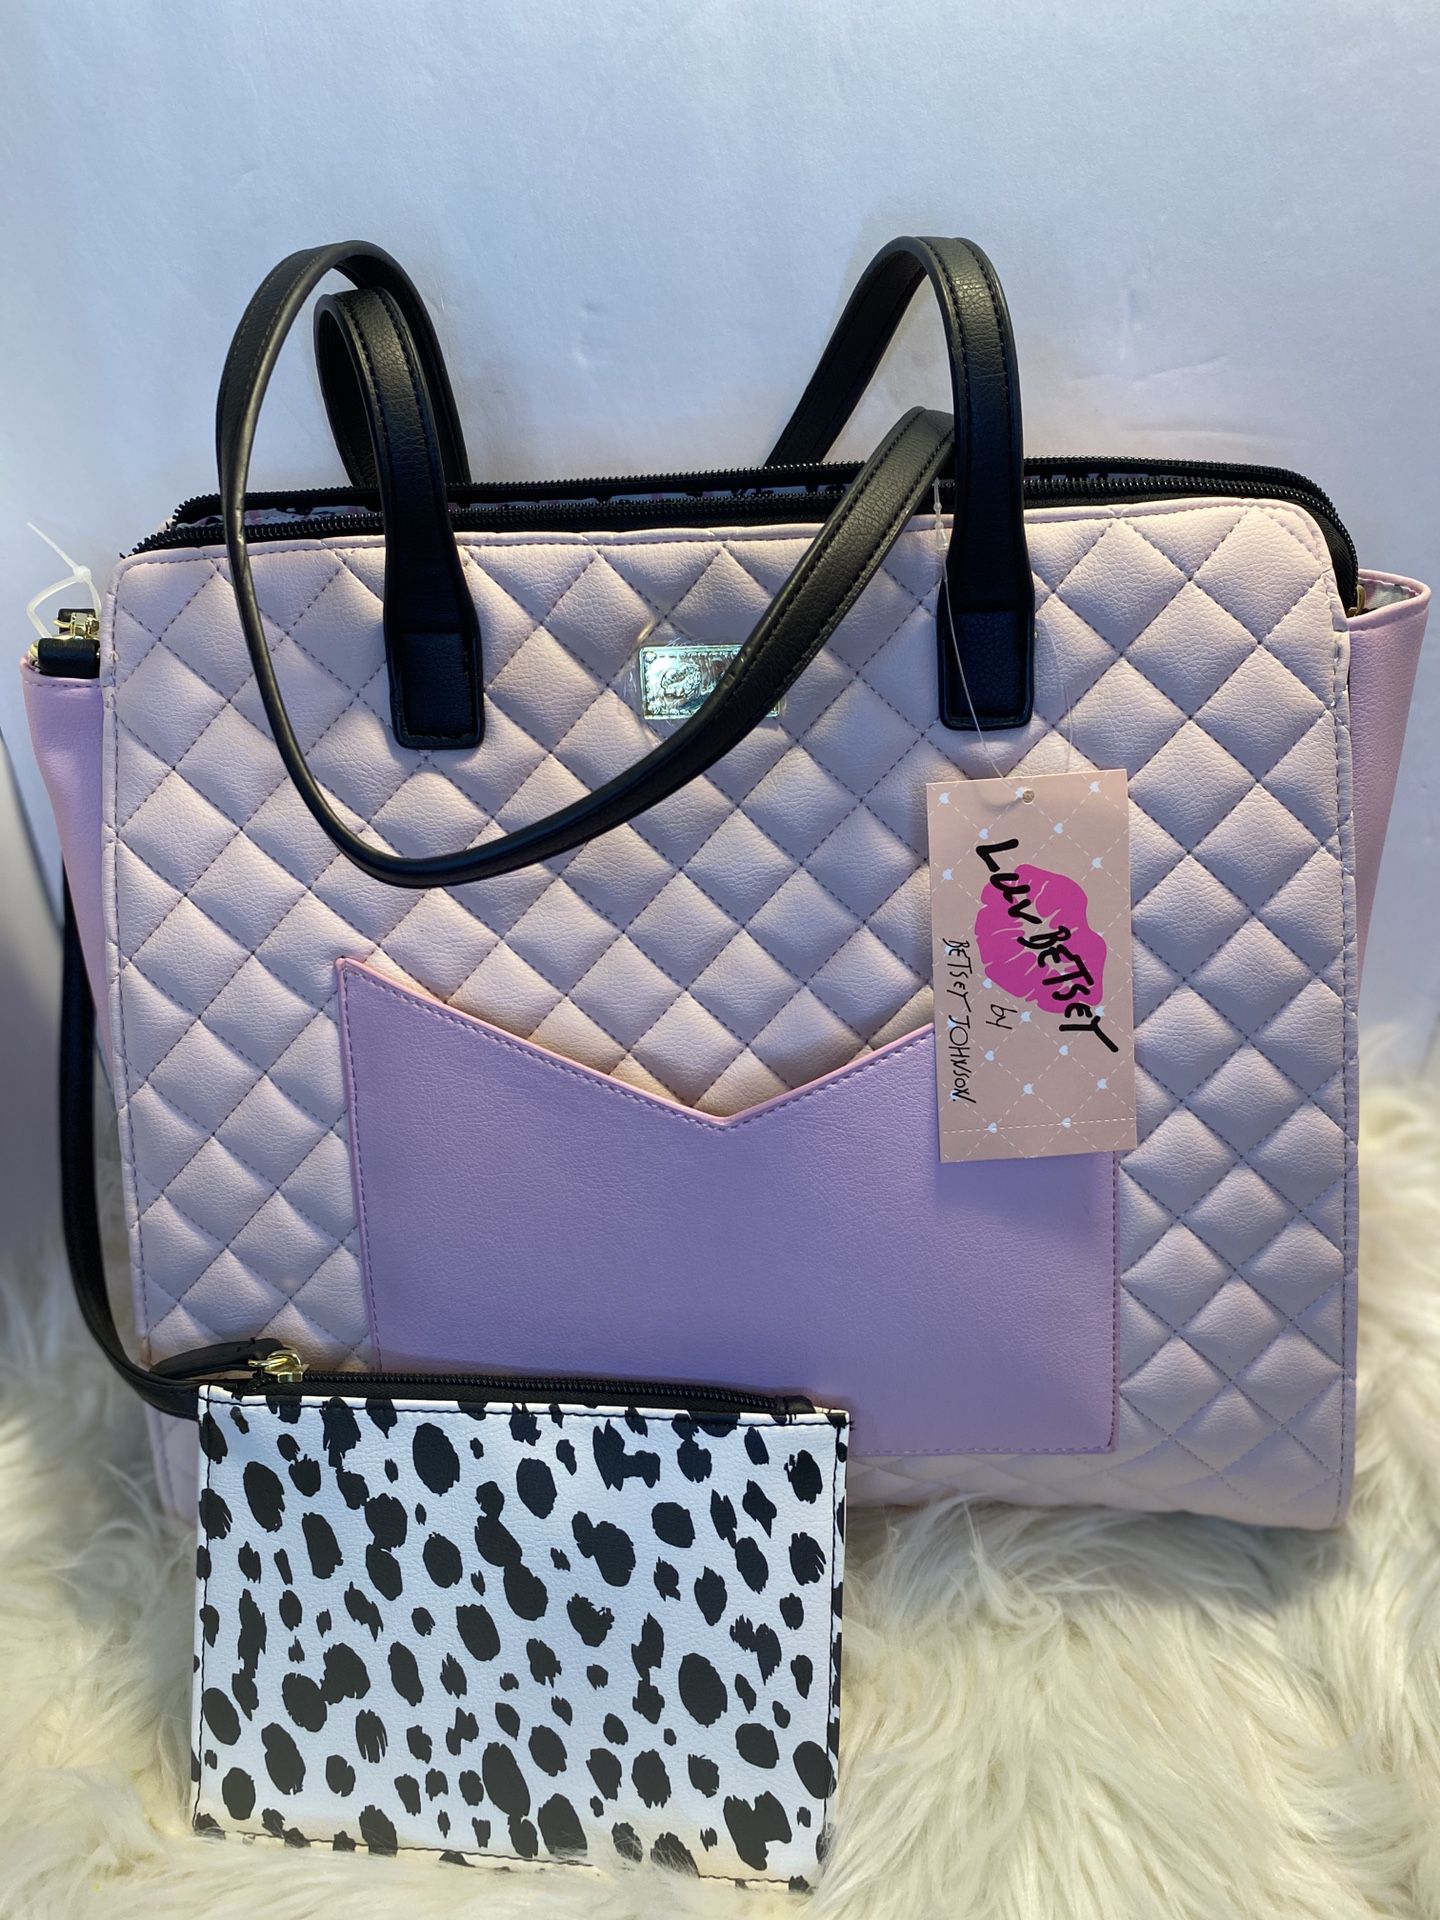 Betsey Johnson Tote bag 2in1